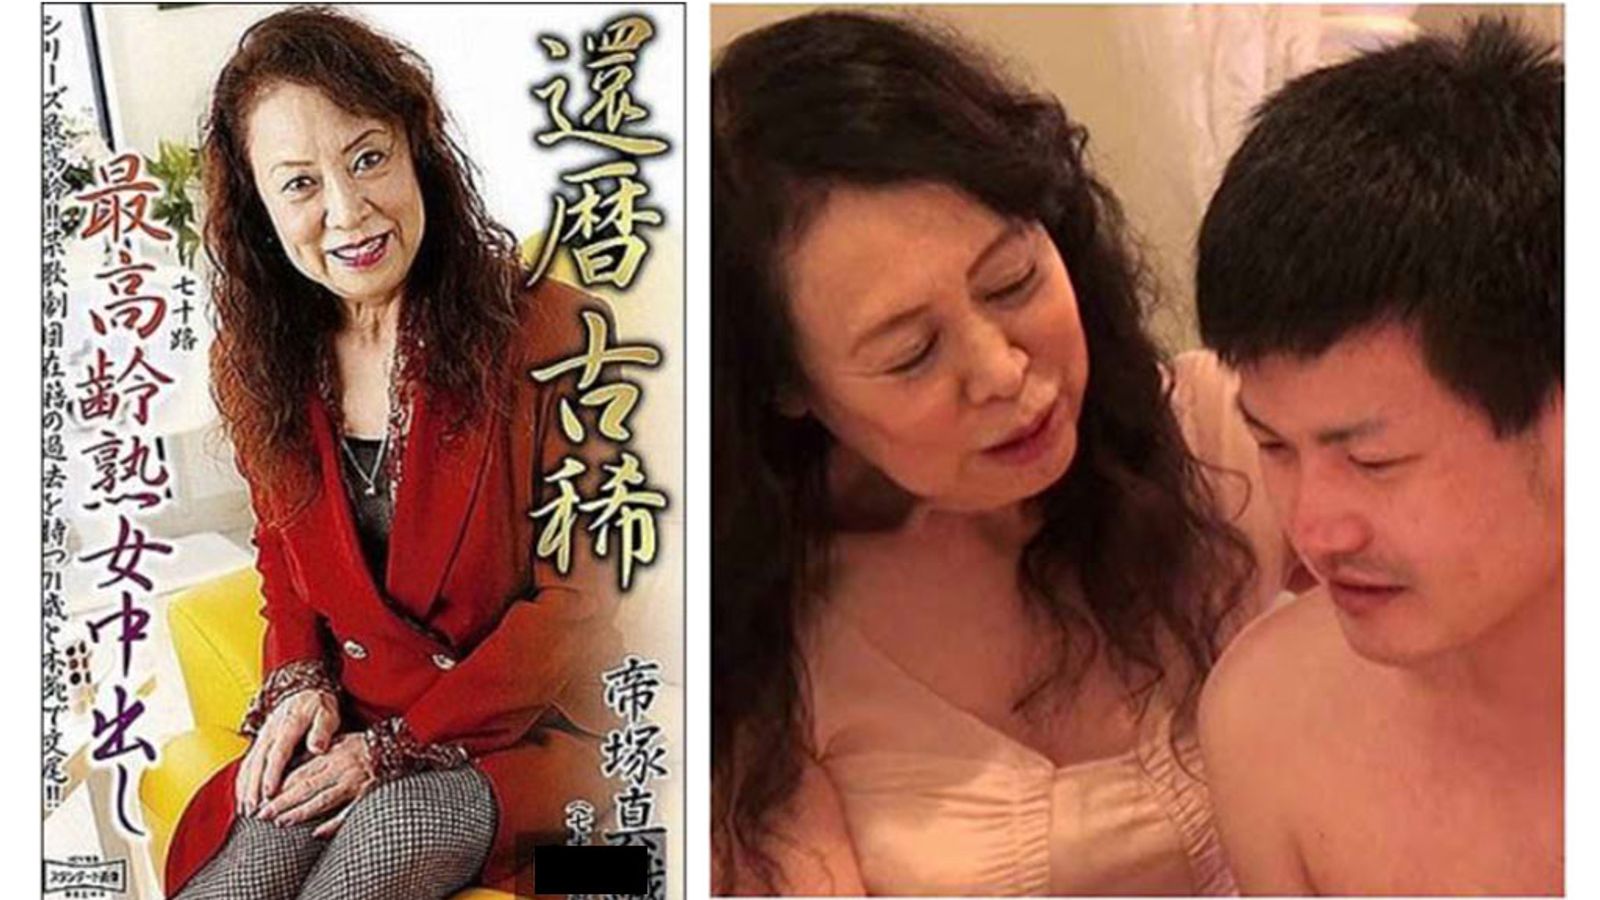 Japan's (And Perhaps The World's) Oldest Porn Star Retires | AVN